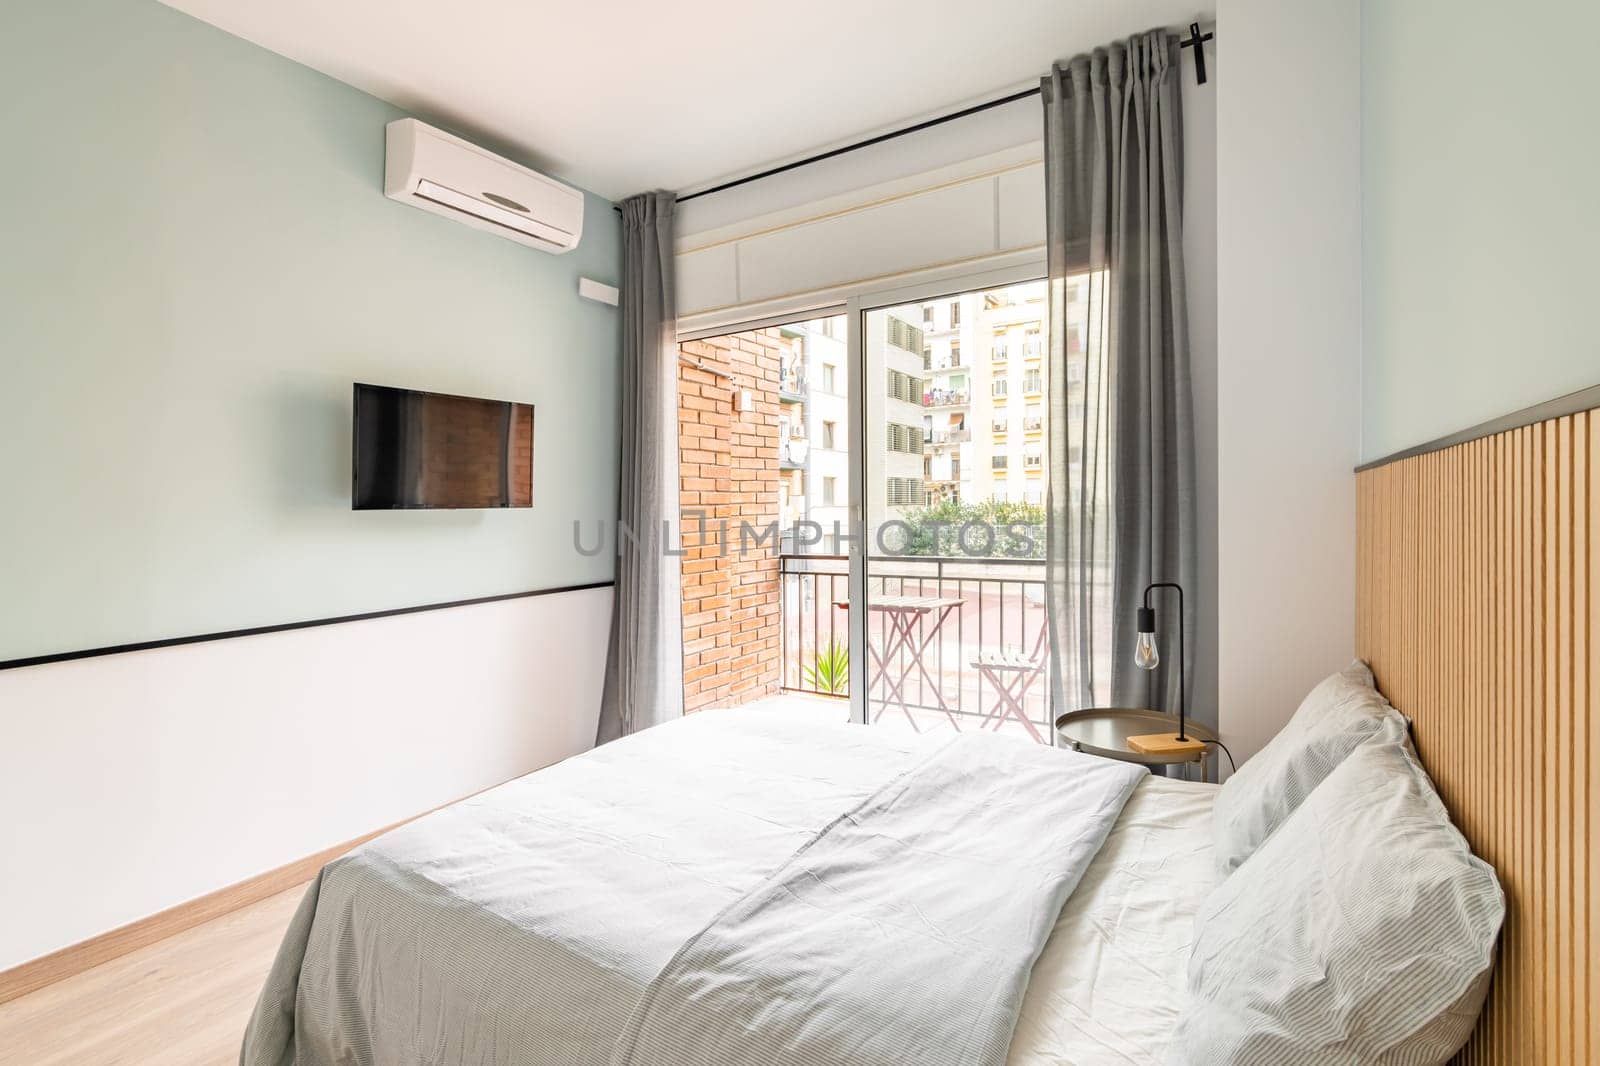 Small but pleasant bedroom with a double bed with white linens, TV and an open terrace overlooking the courtyard of a residential complex or tourist hotel on a sunny summer day by apavlin